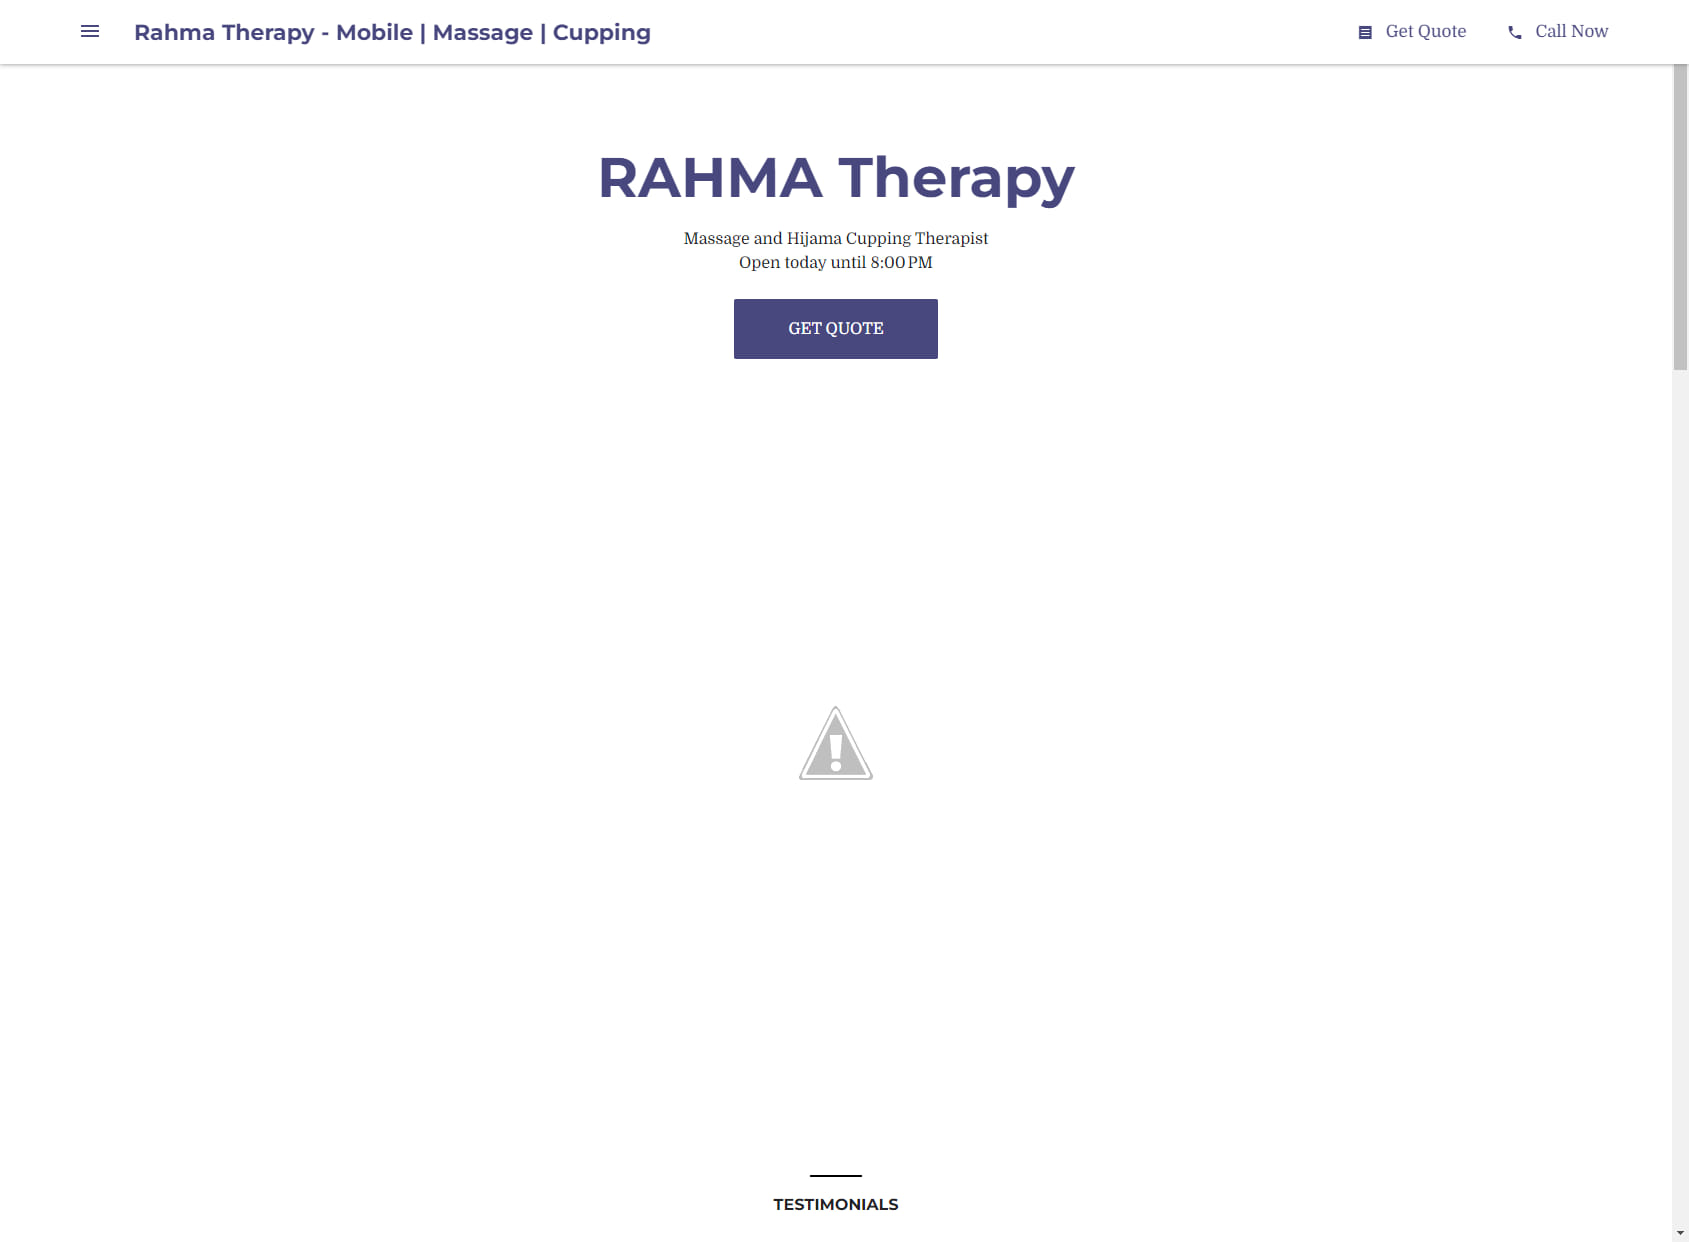 Rahma Therapy - Mobile | Massage | Cupping